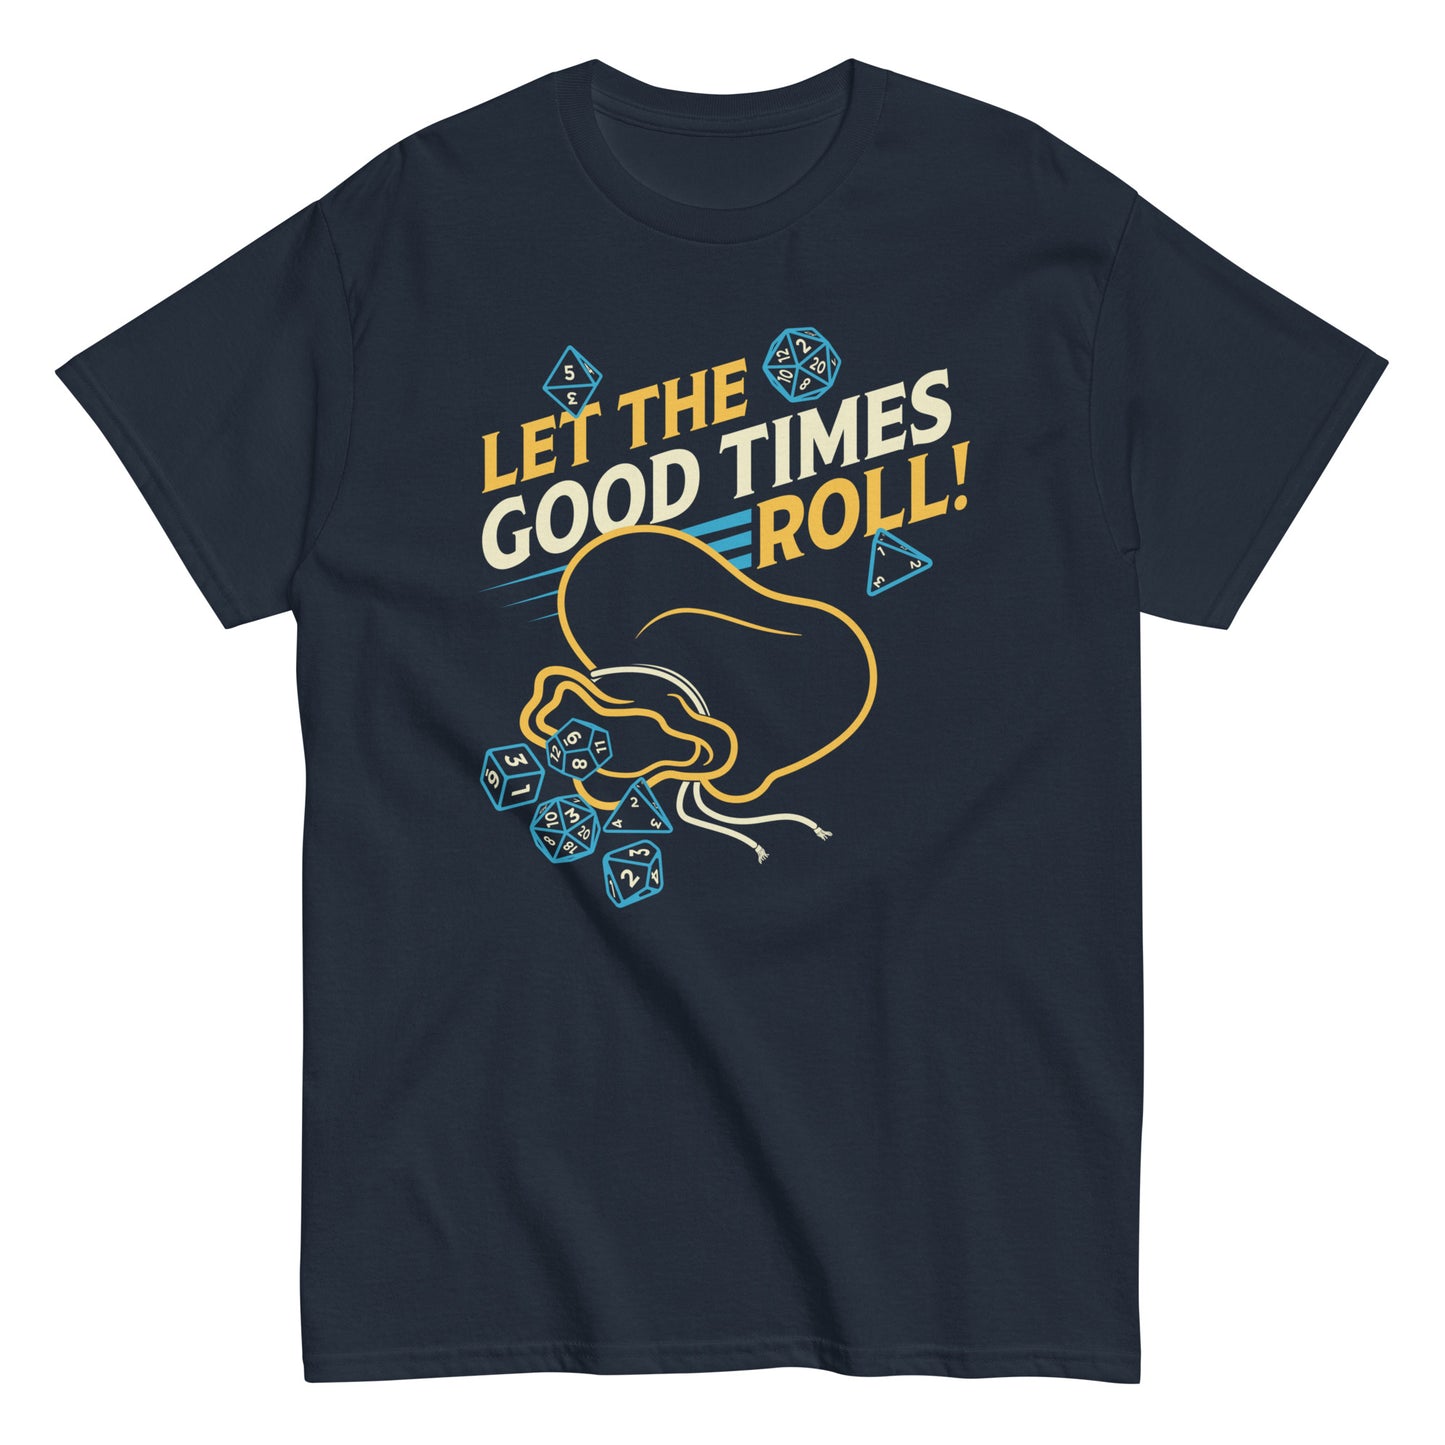 Let The Good Times Roll! Men's Classic Tee